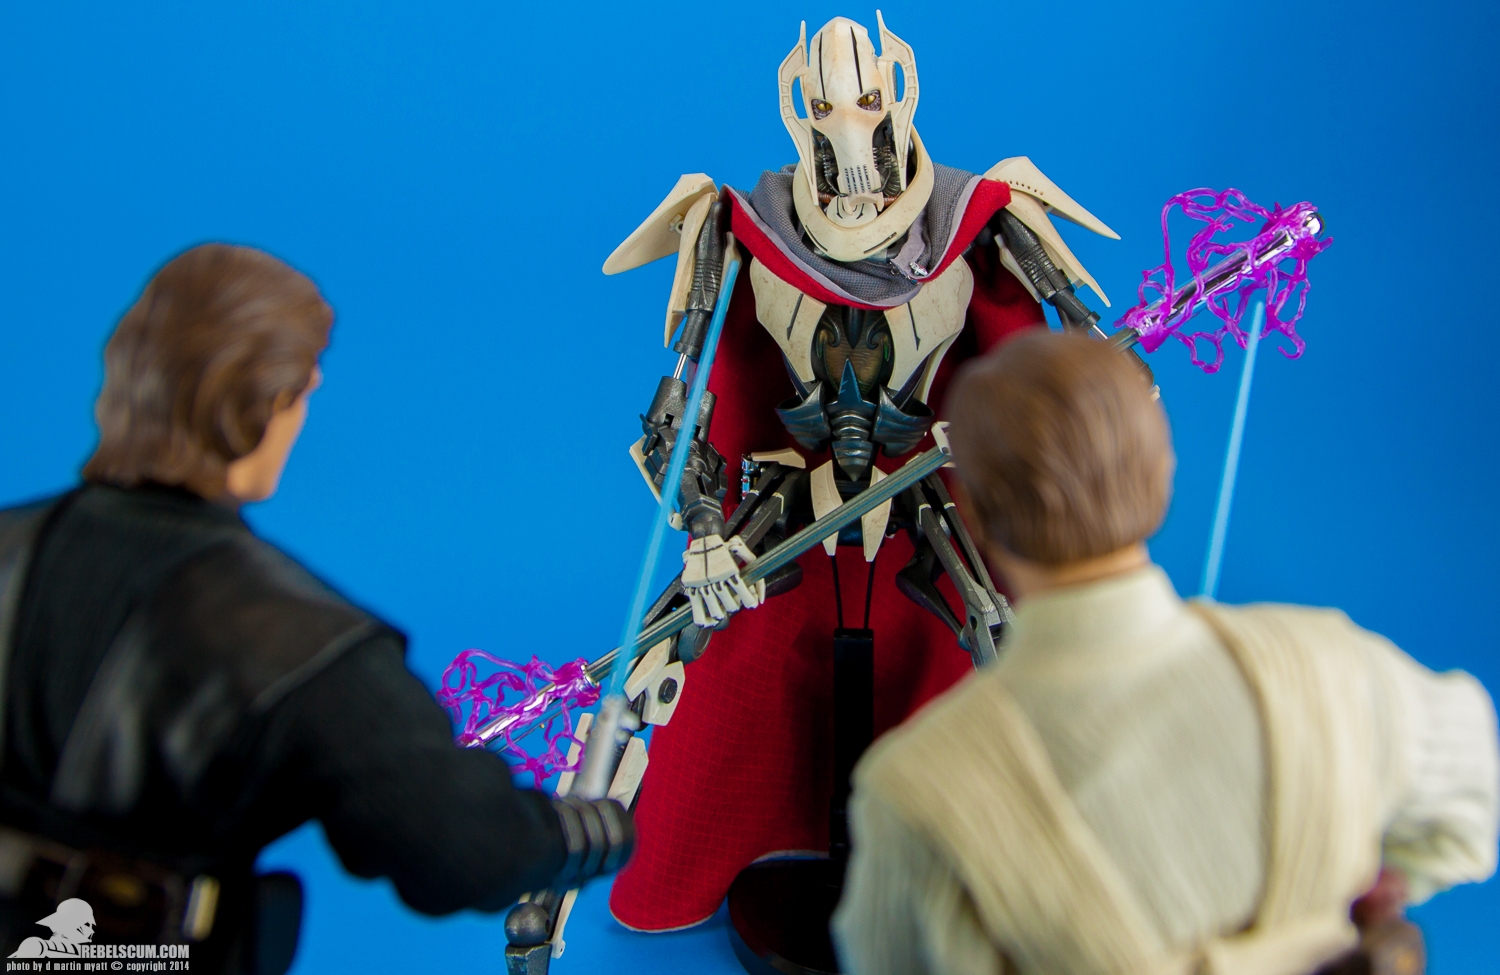 General-Grievous-Sixth-Scale-Figure-Sideshow-Collectibles-029.jpg